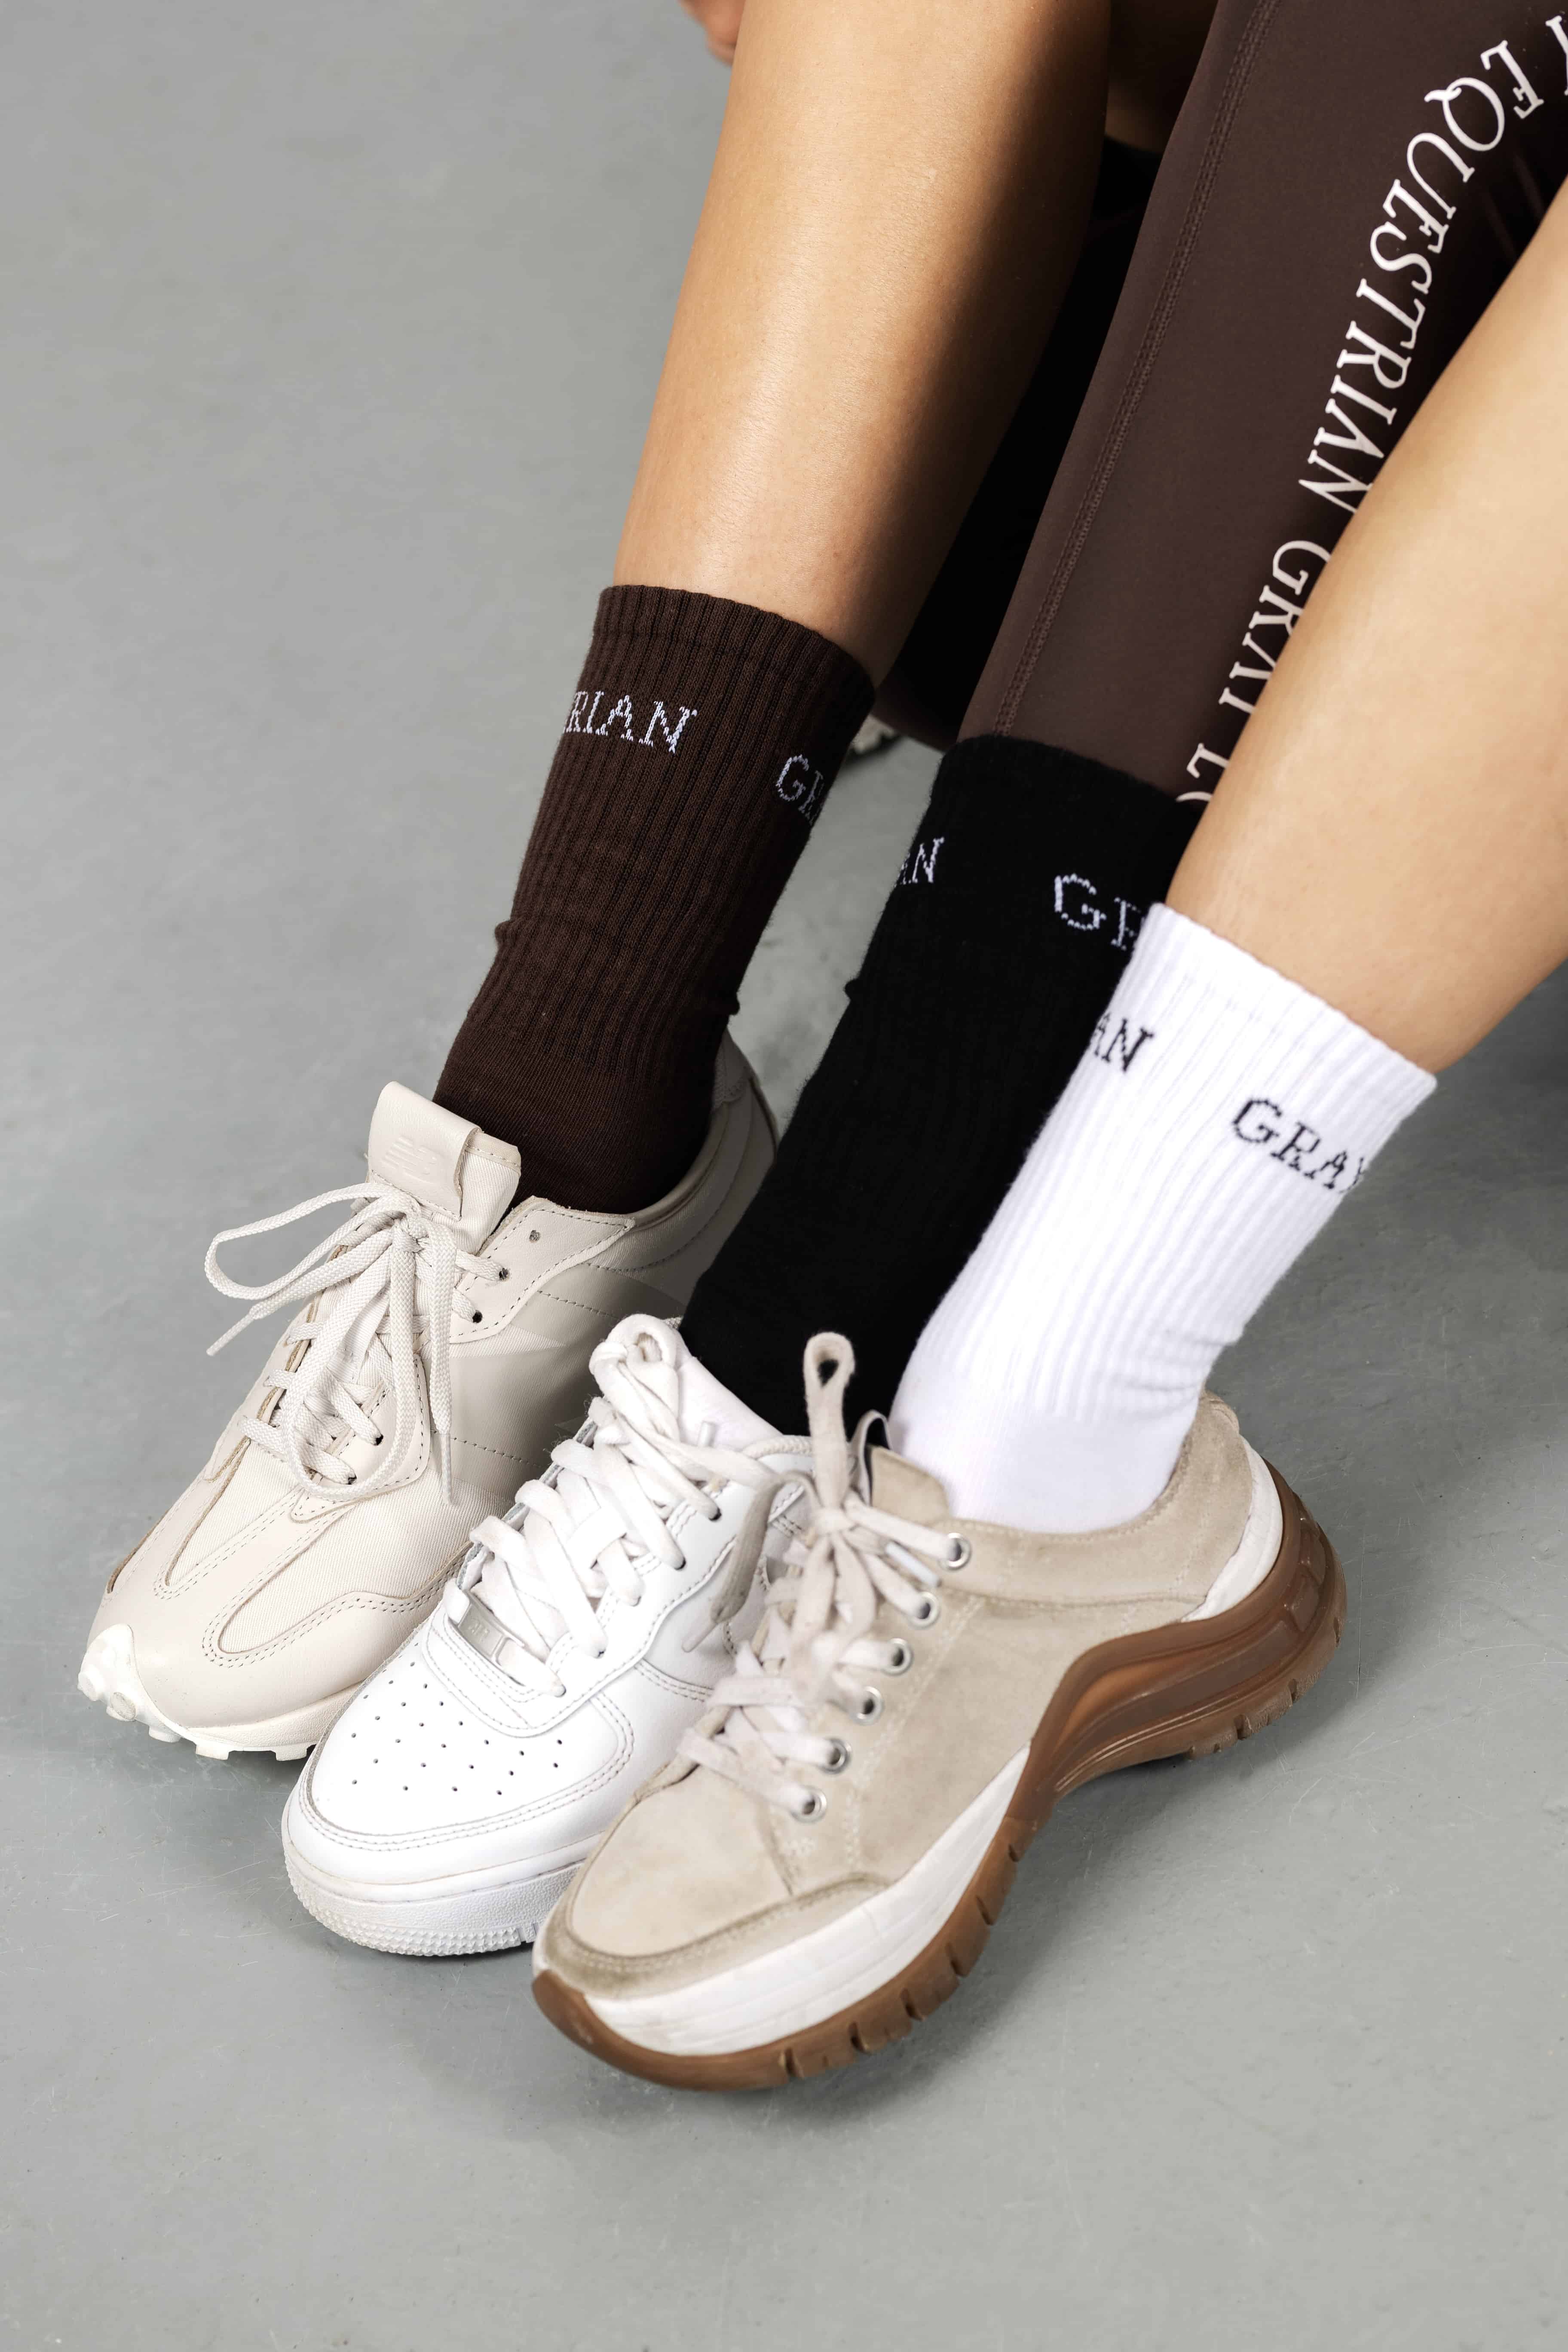 Models wearing our brown, black and white renew socks.